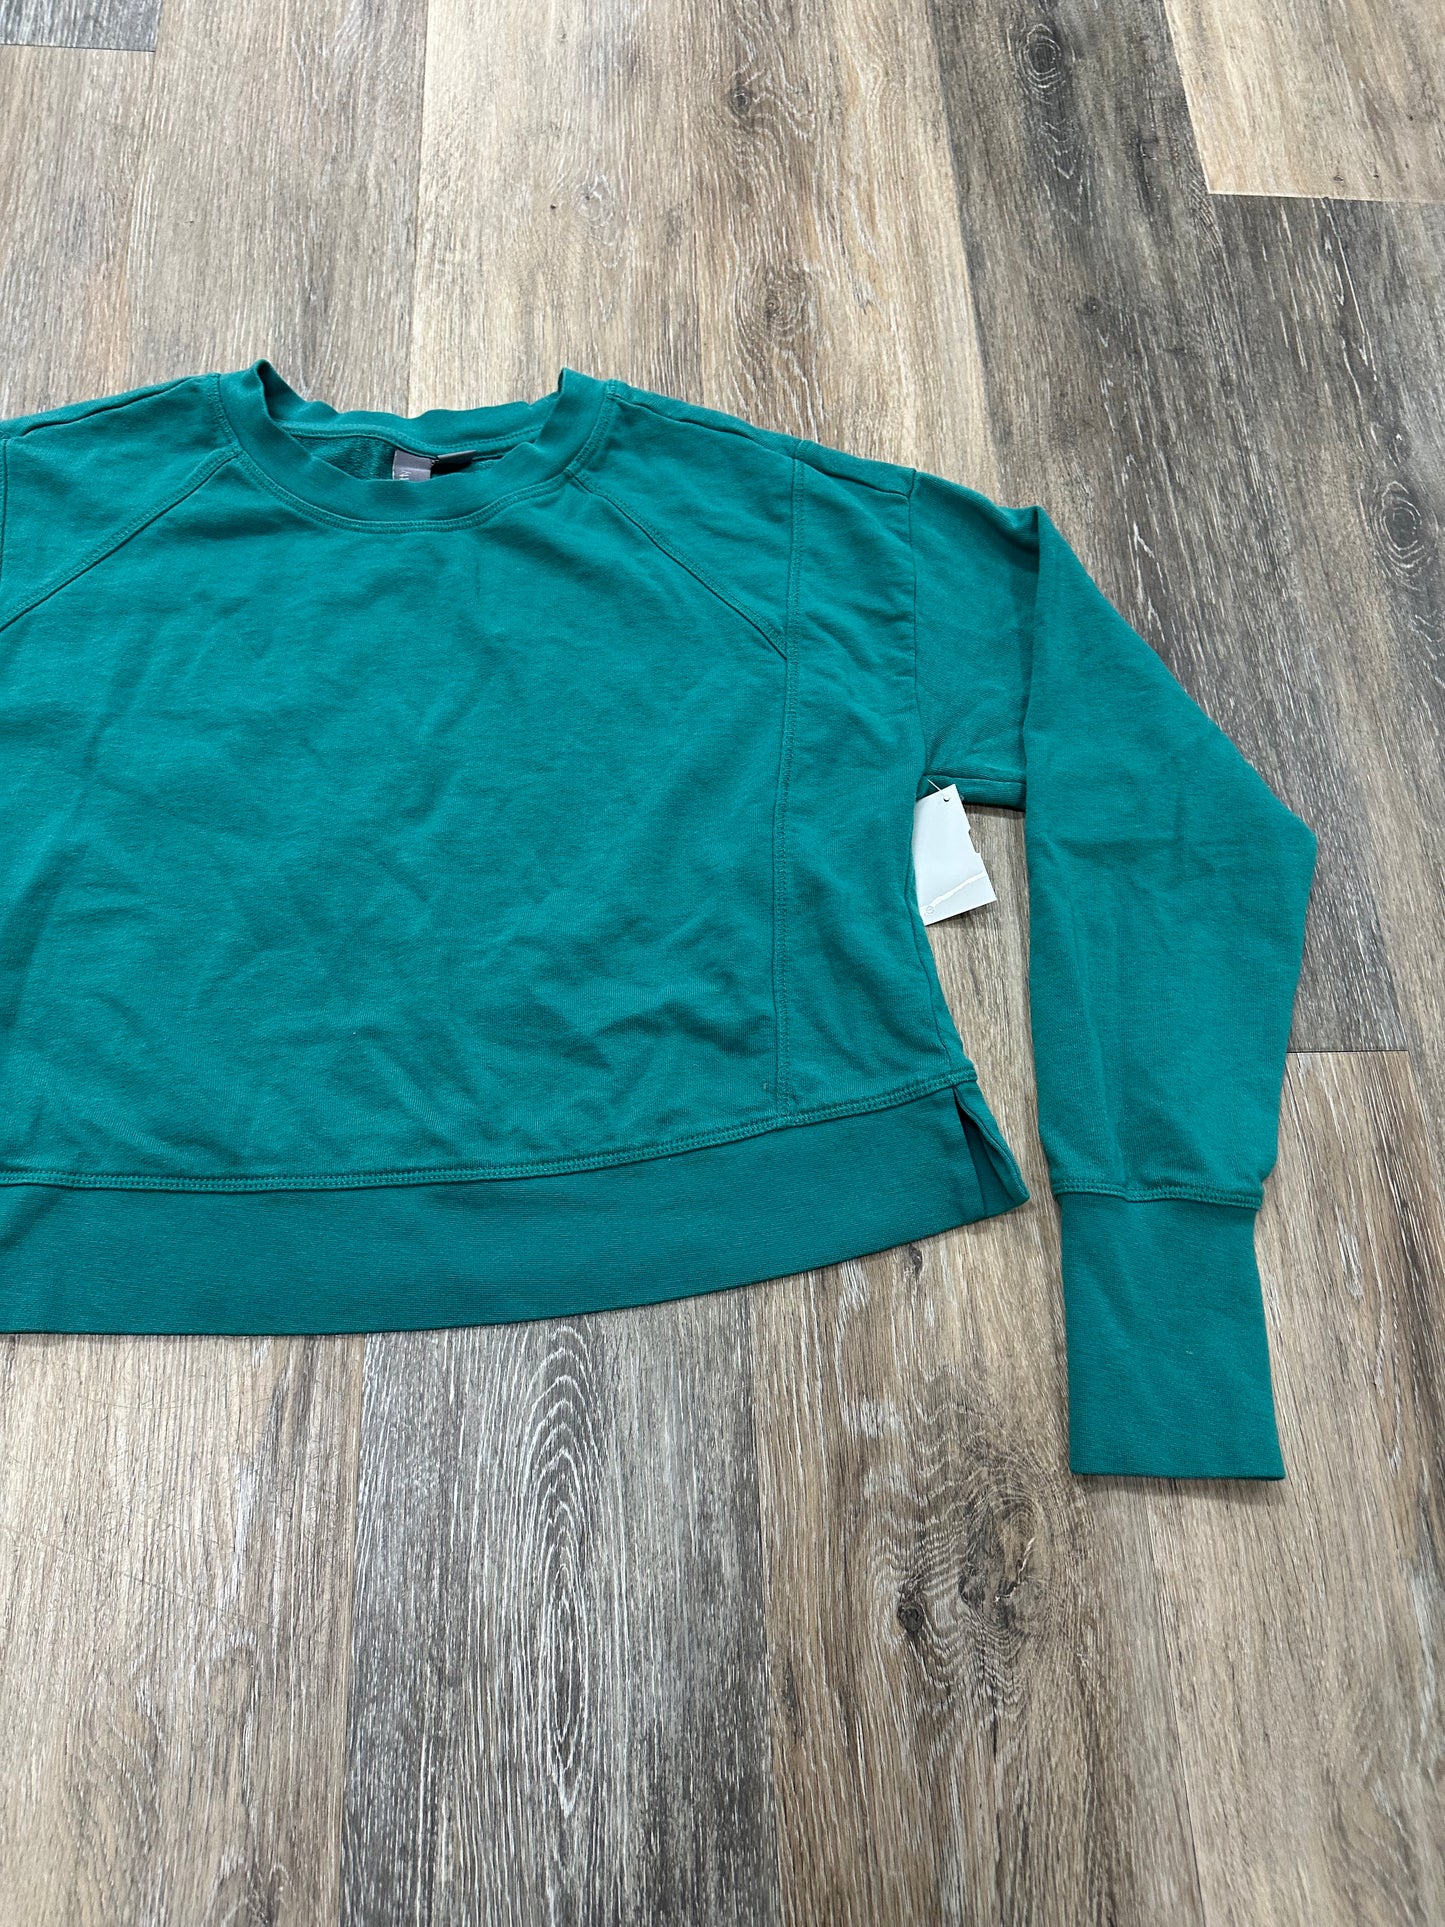 Athletic Top Long Sleeve Crewneck By Sweaty Betty  Size: 6